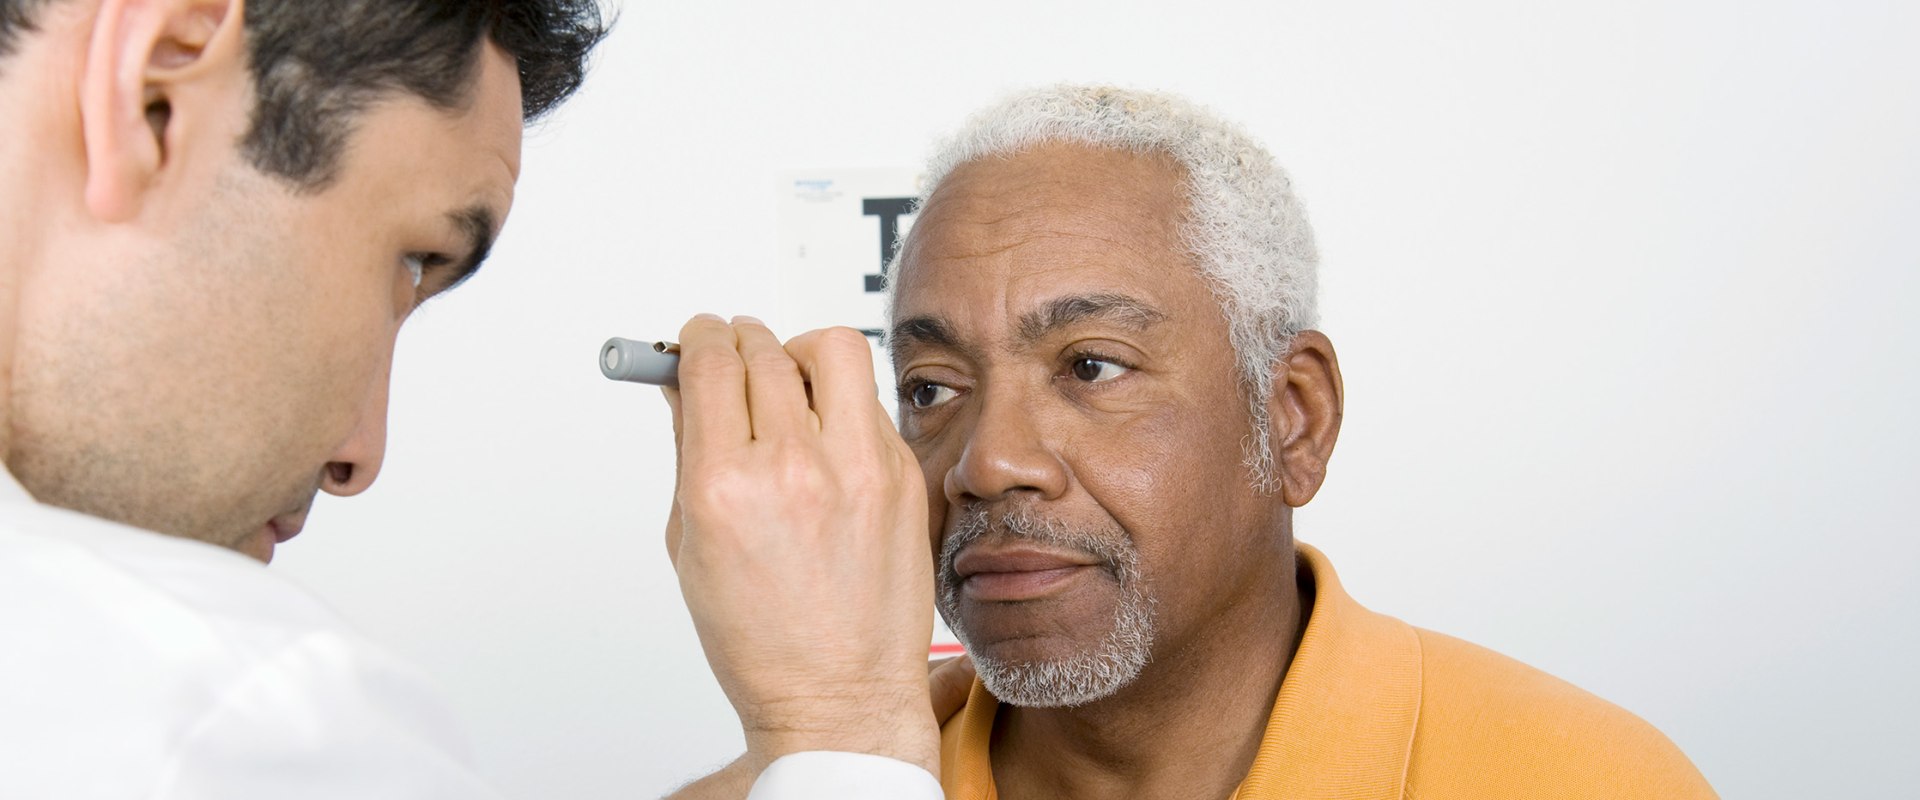 Geriatric Vision Care: Can Optometrists Provide Specialty Services?